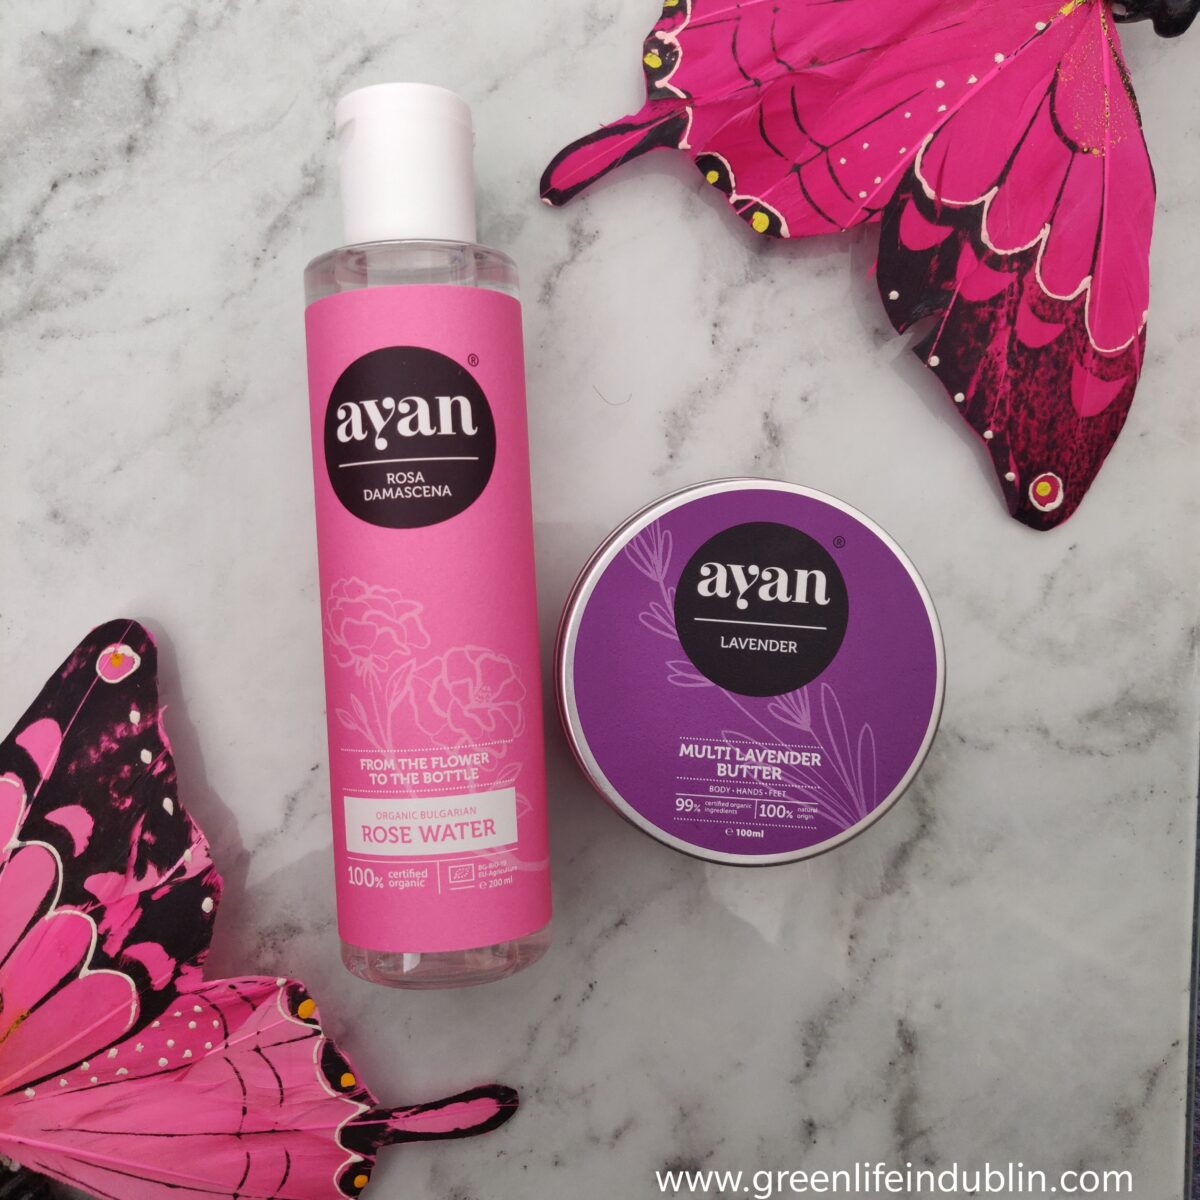 Ayan Review – Body Butter & Organic Rose Water [AD]